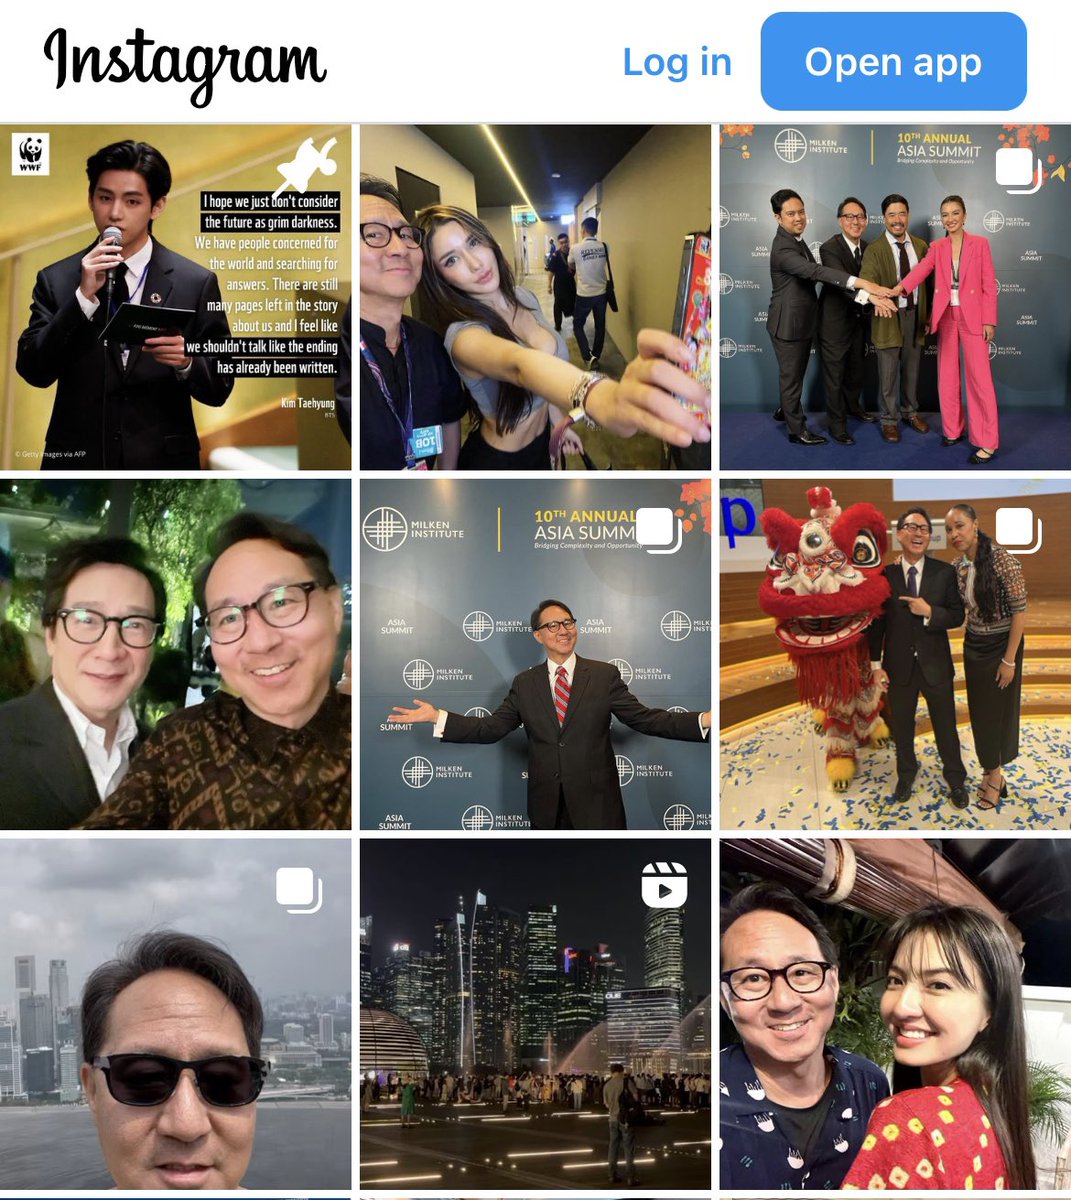 The key, so to speak, to all this on that slippery slope called my IG feed. 🤣Picture this… 🇺🇸🇸🇬🇸🇬 🇸🇬🇸🇬🇸🇬 🇸🇬🇸🇬🇮🇩 #BTSV #DJ #RandallPark #KehuyQuan #MIGlobal @NValentineTV @marinabaysands #F1NightRace #RalineShah